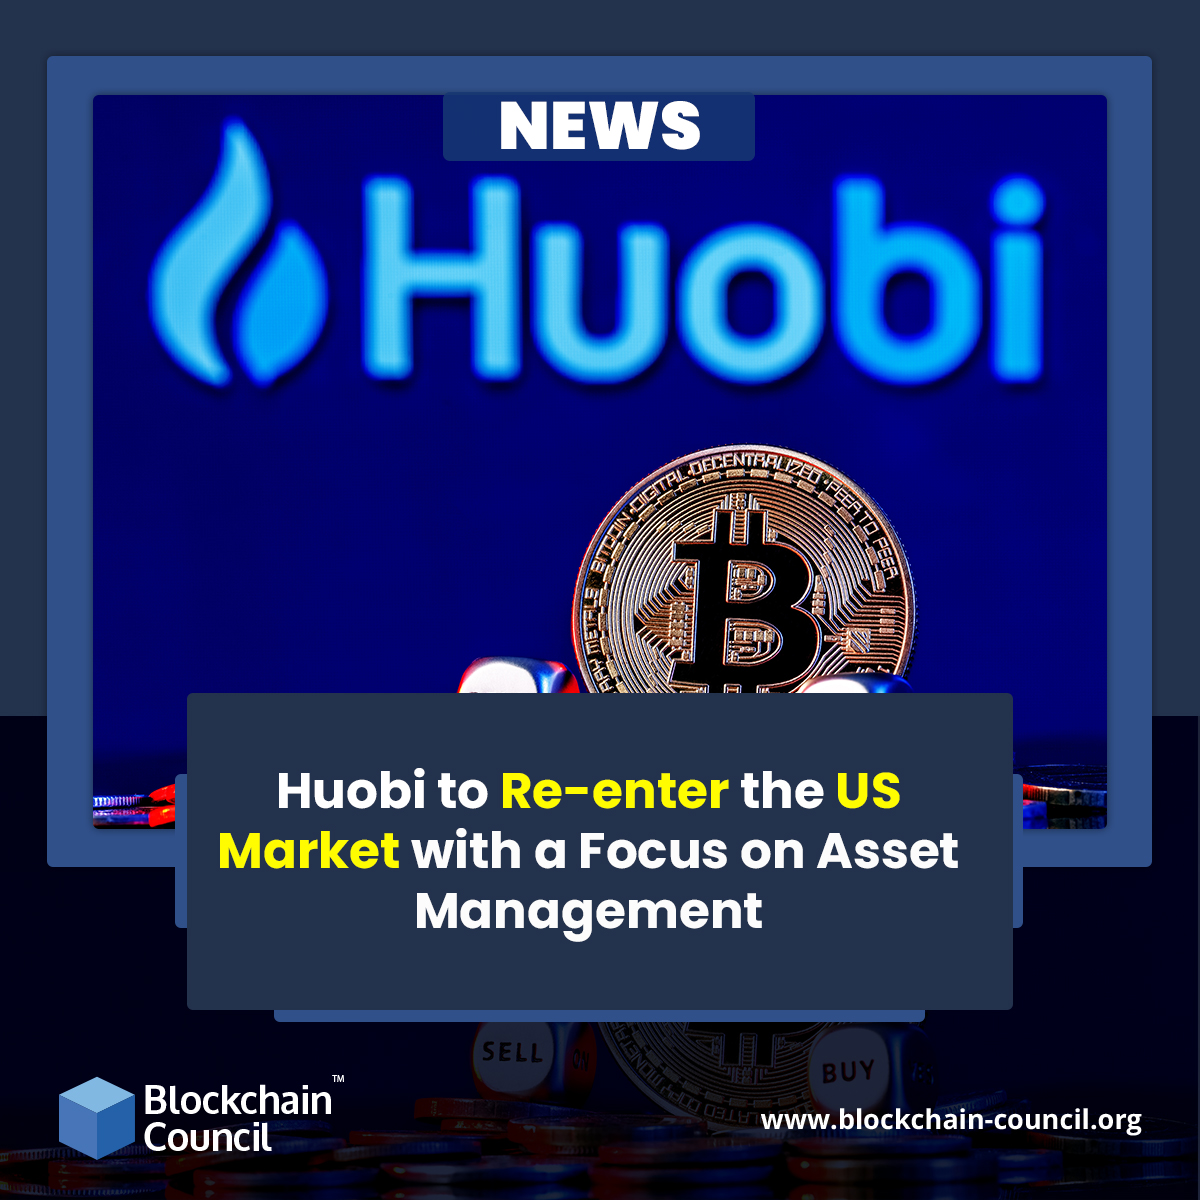 Huobi to Re-enter the US Market with a Focus on Asset Management